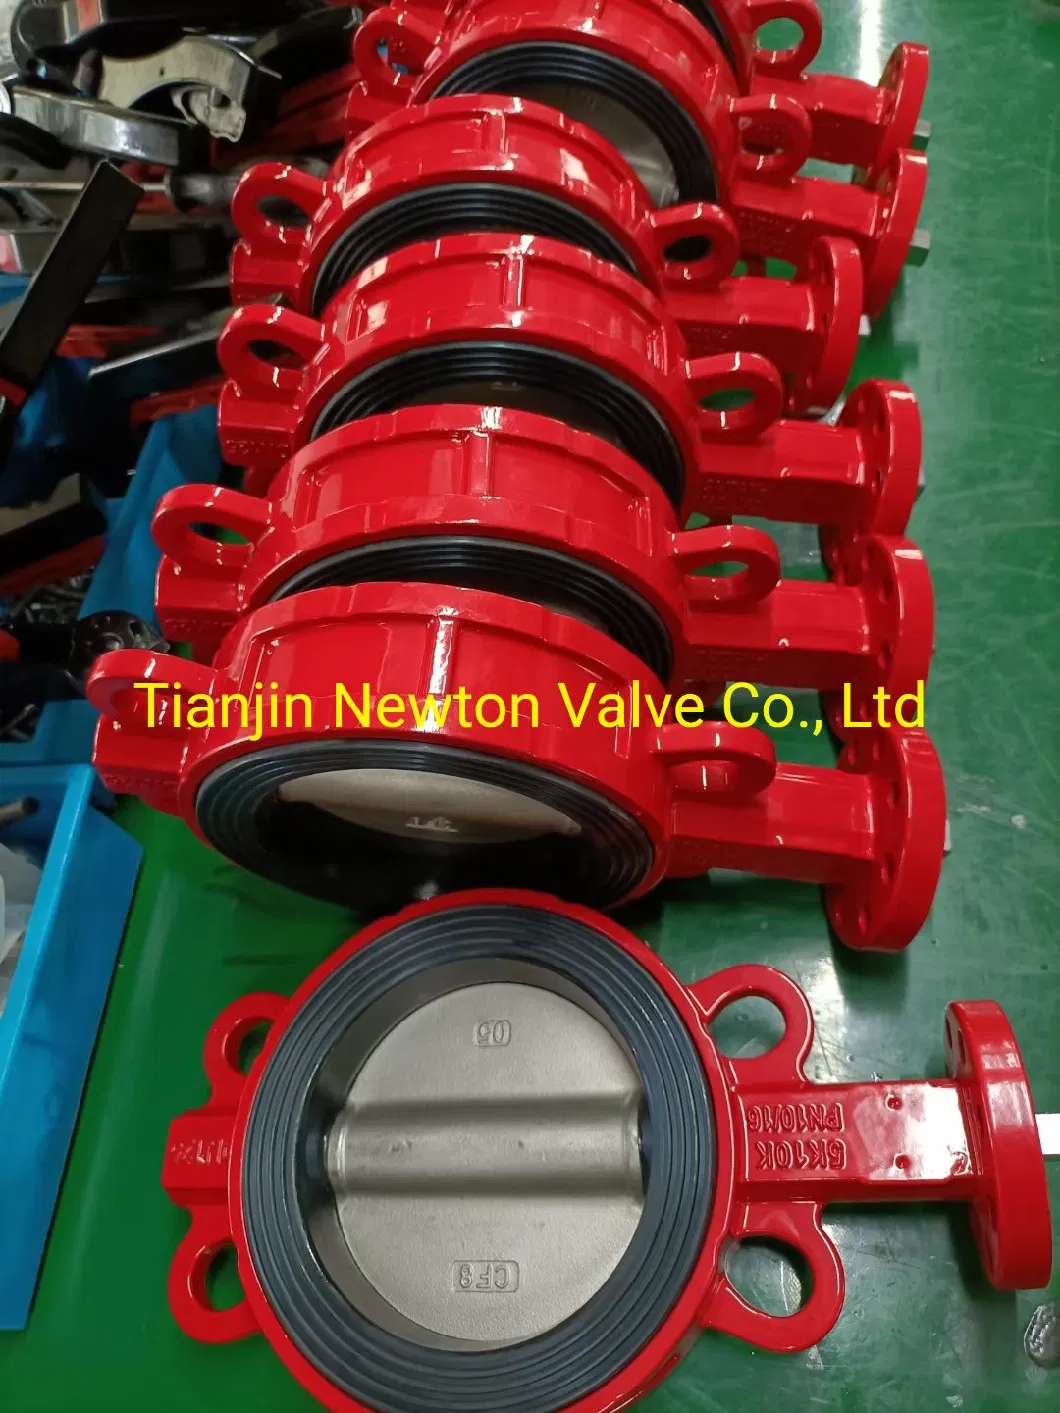 Butterfly Valve for Paper Pulp Chemical Industrial Power Utilities Petrochemical Sewage Water Supply Ship Building Food Beverage Fire Protection